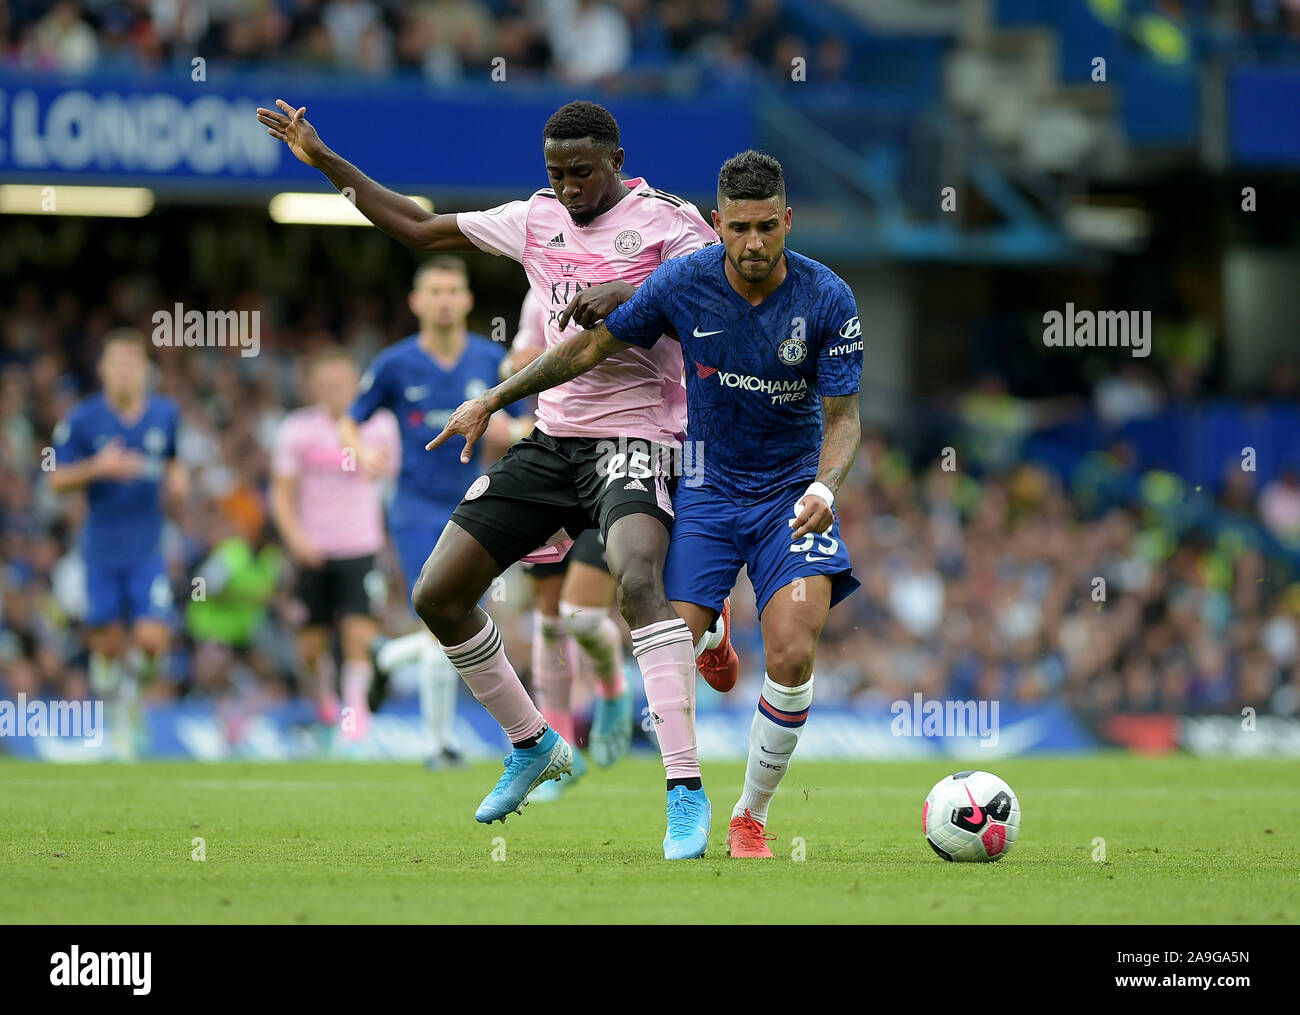 Emerson Palmieri of Chelsea clashes with Wilfred Ndidi of Leicester City during the Chelsea vs Leicester City Premier League match at Stamford Bridge Stock Photo